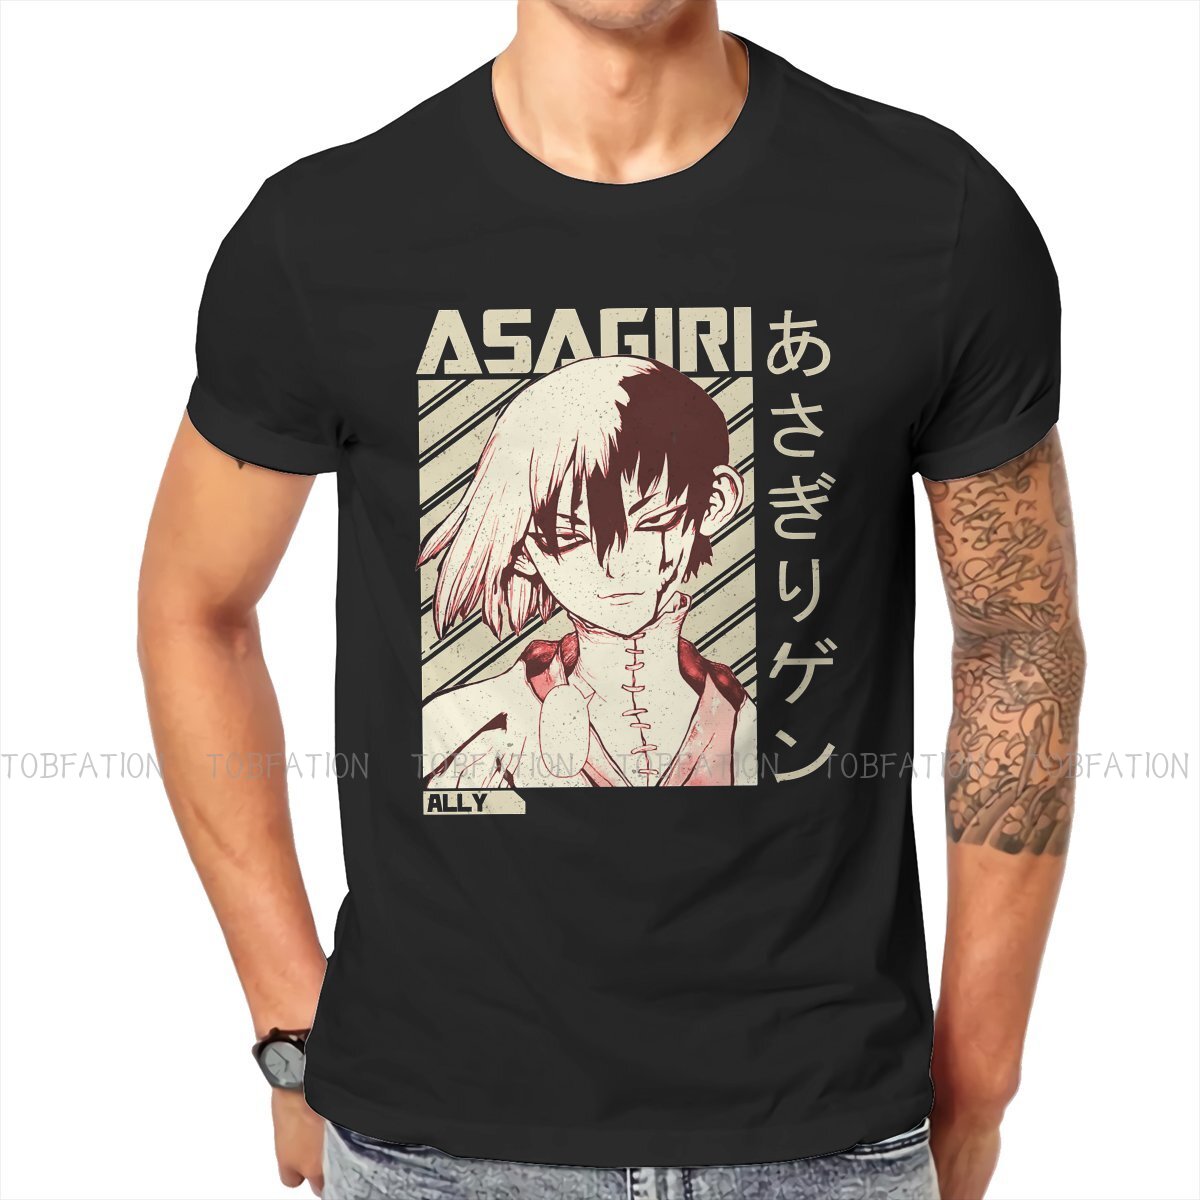 Gen Style TShirt Dr Stone Chemistry Anime Top Quality New Design Gift Clothes T Shirt Stuff - Dr. Stone Merch